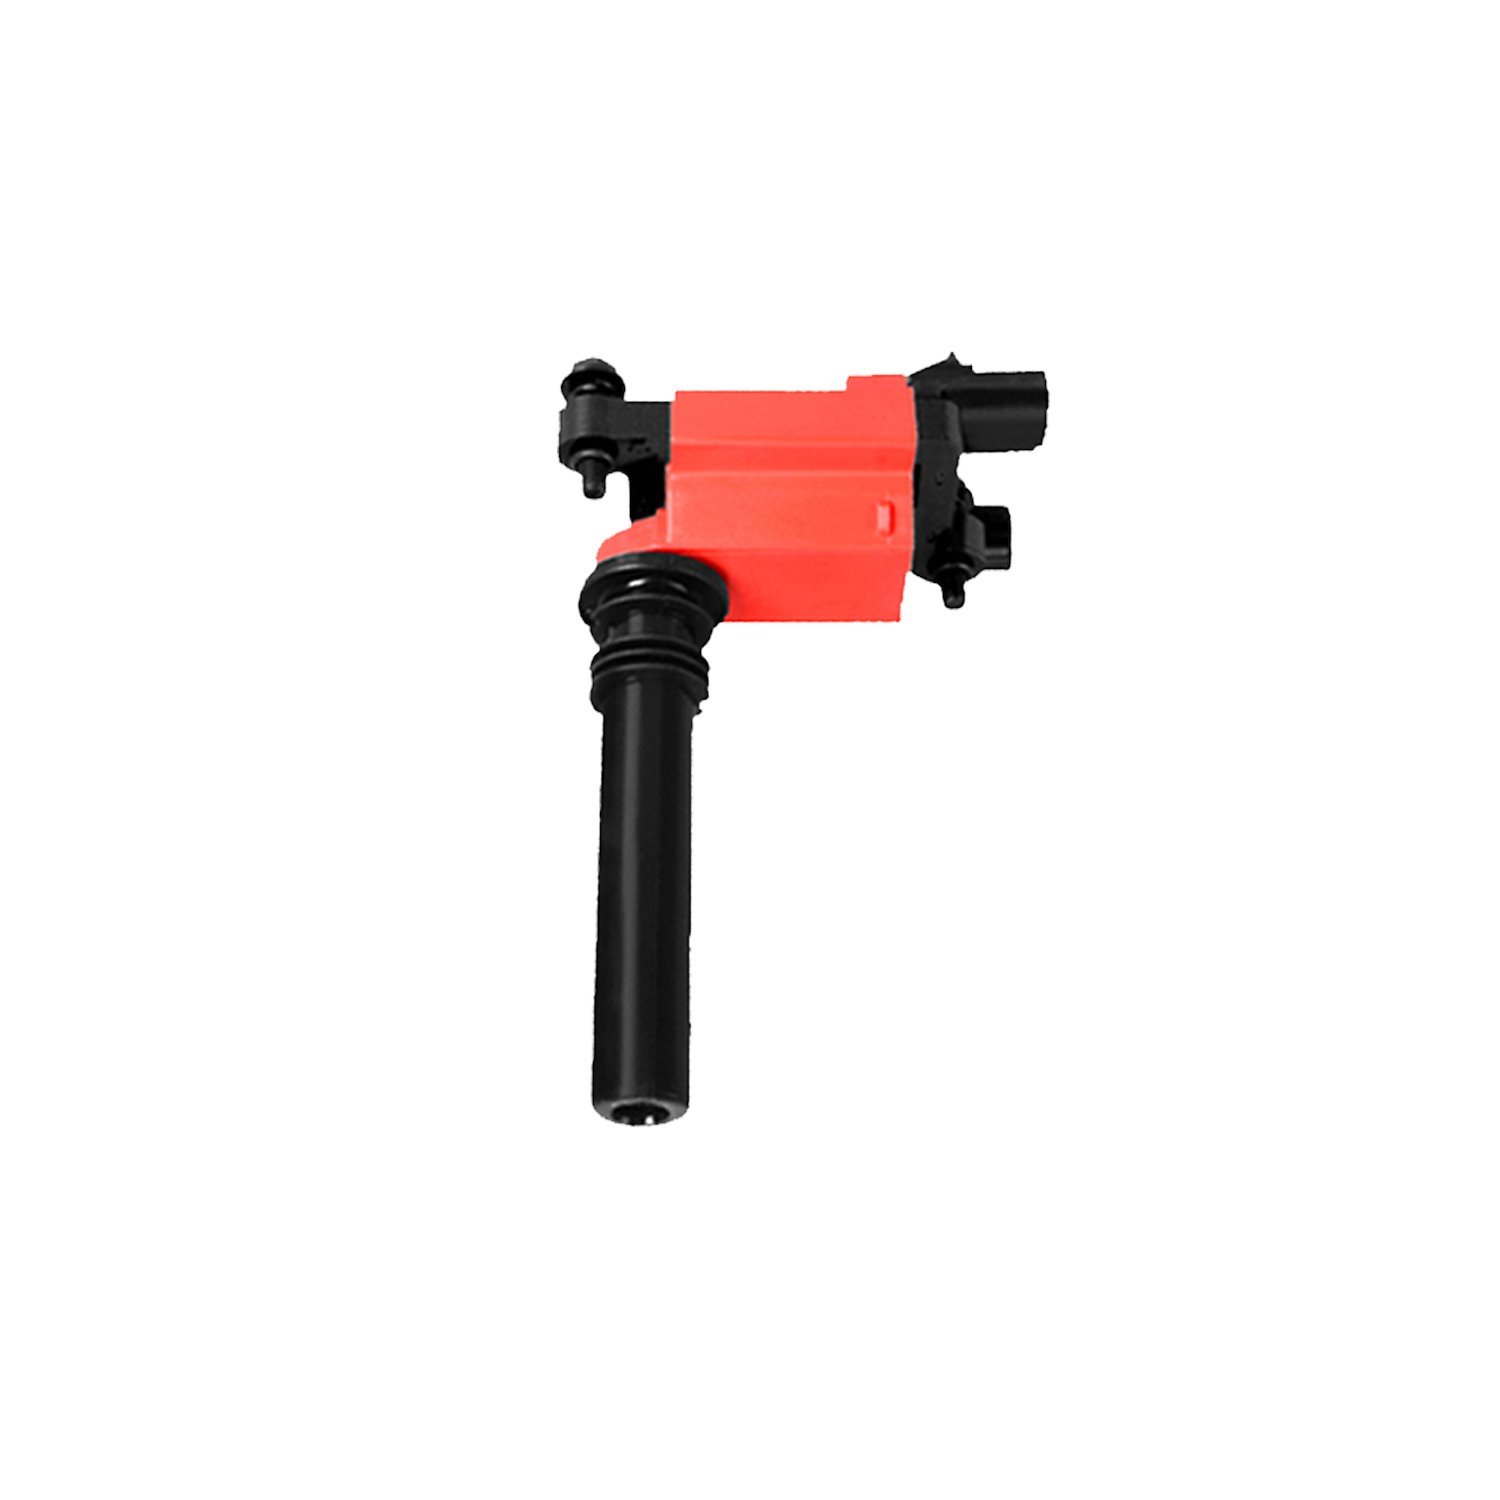 High-Performance Ignition Coil for Dodge Ram 1500/Durango/Chrysler 300/Jeep 5.7L [Red]